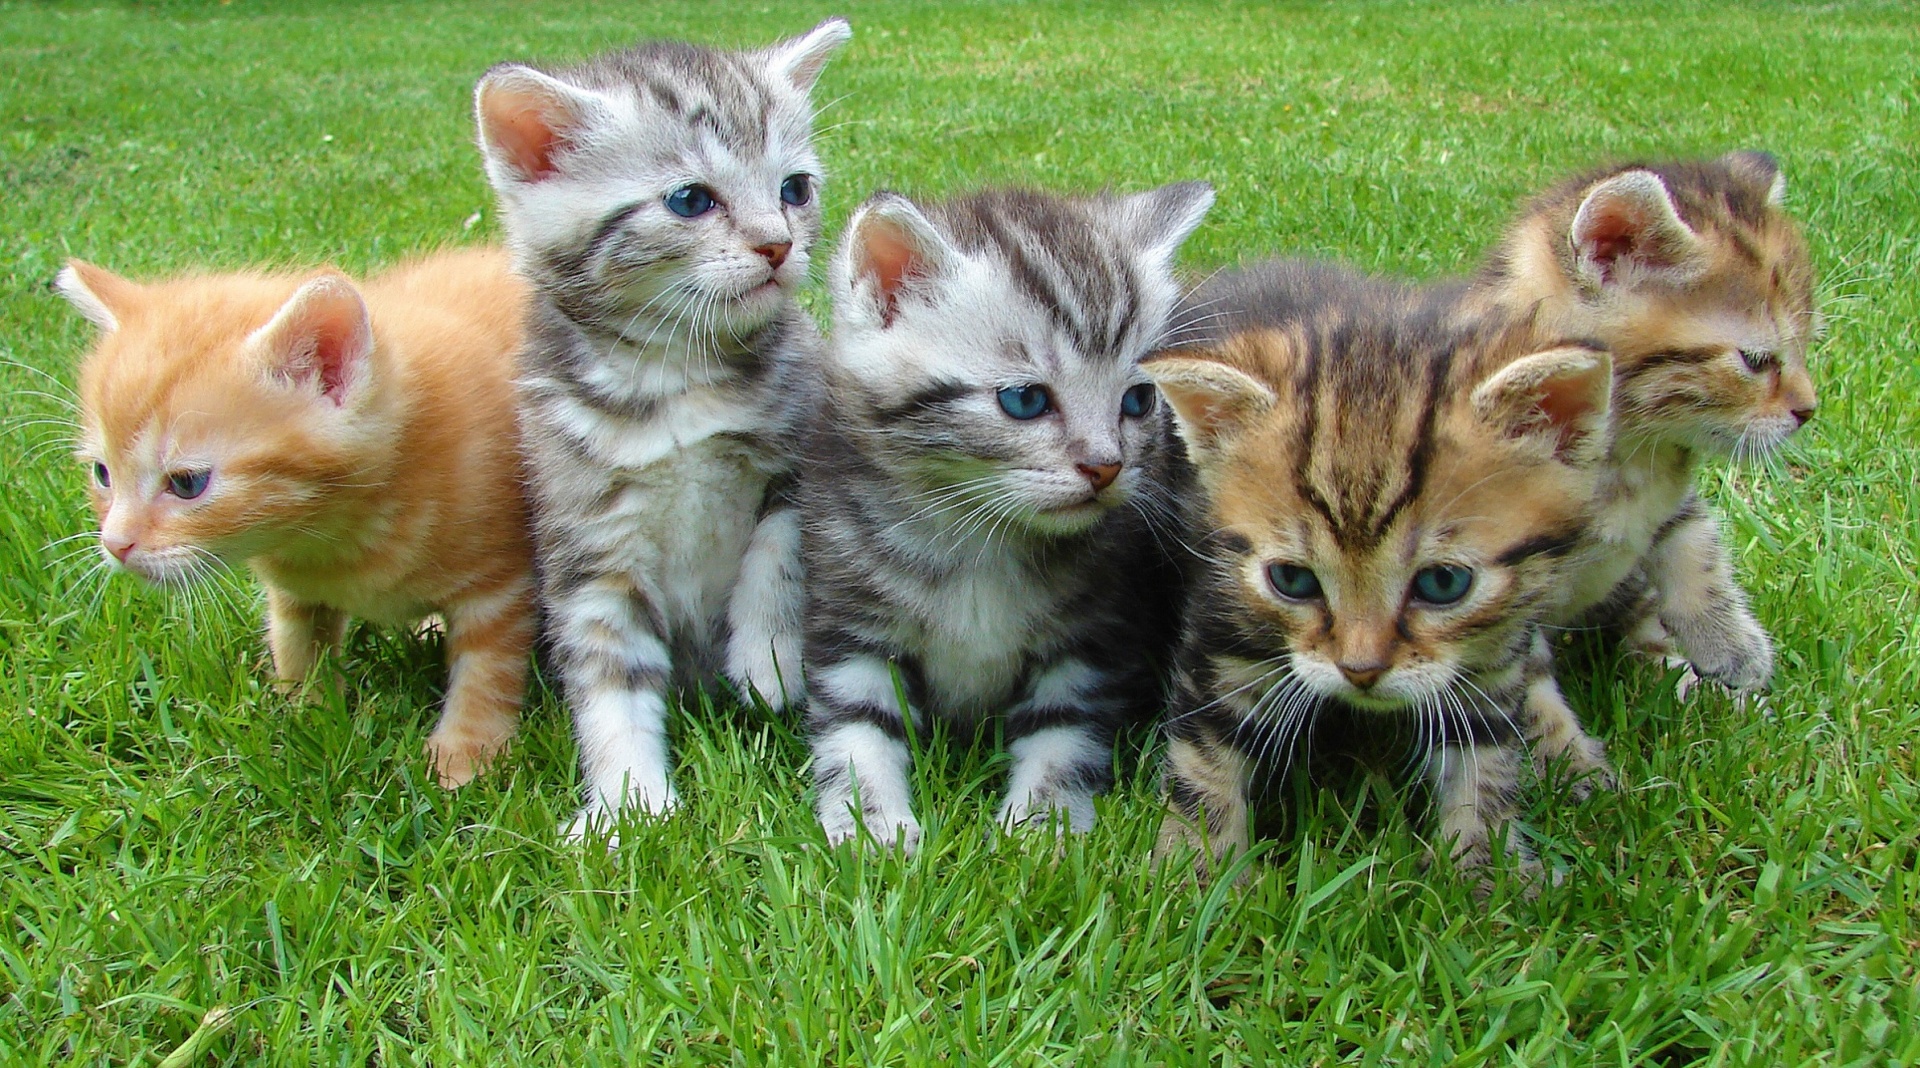 Kittens, Cute, Curious, Nature, Countryside, Cats Wallpaper, Background